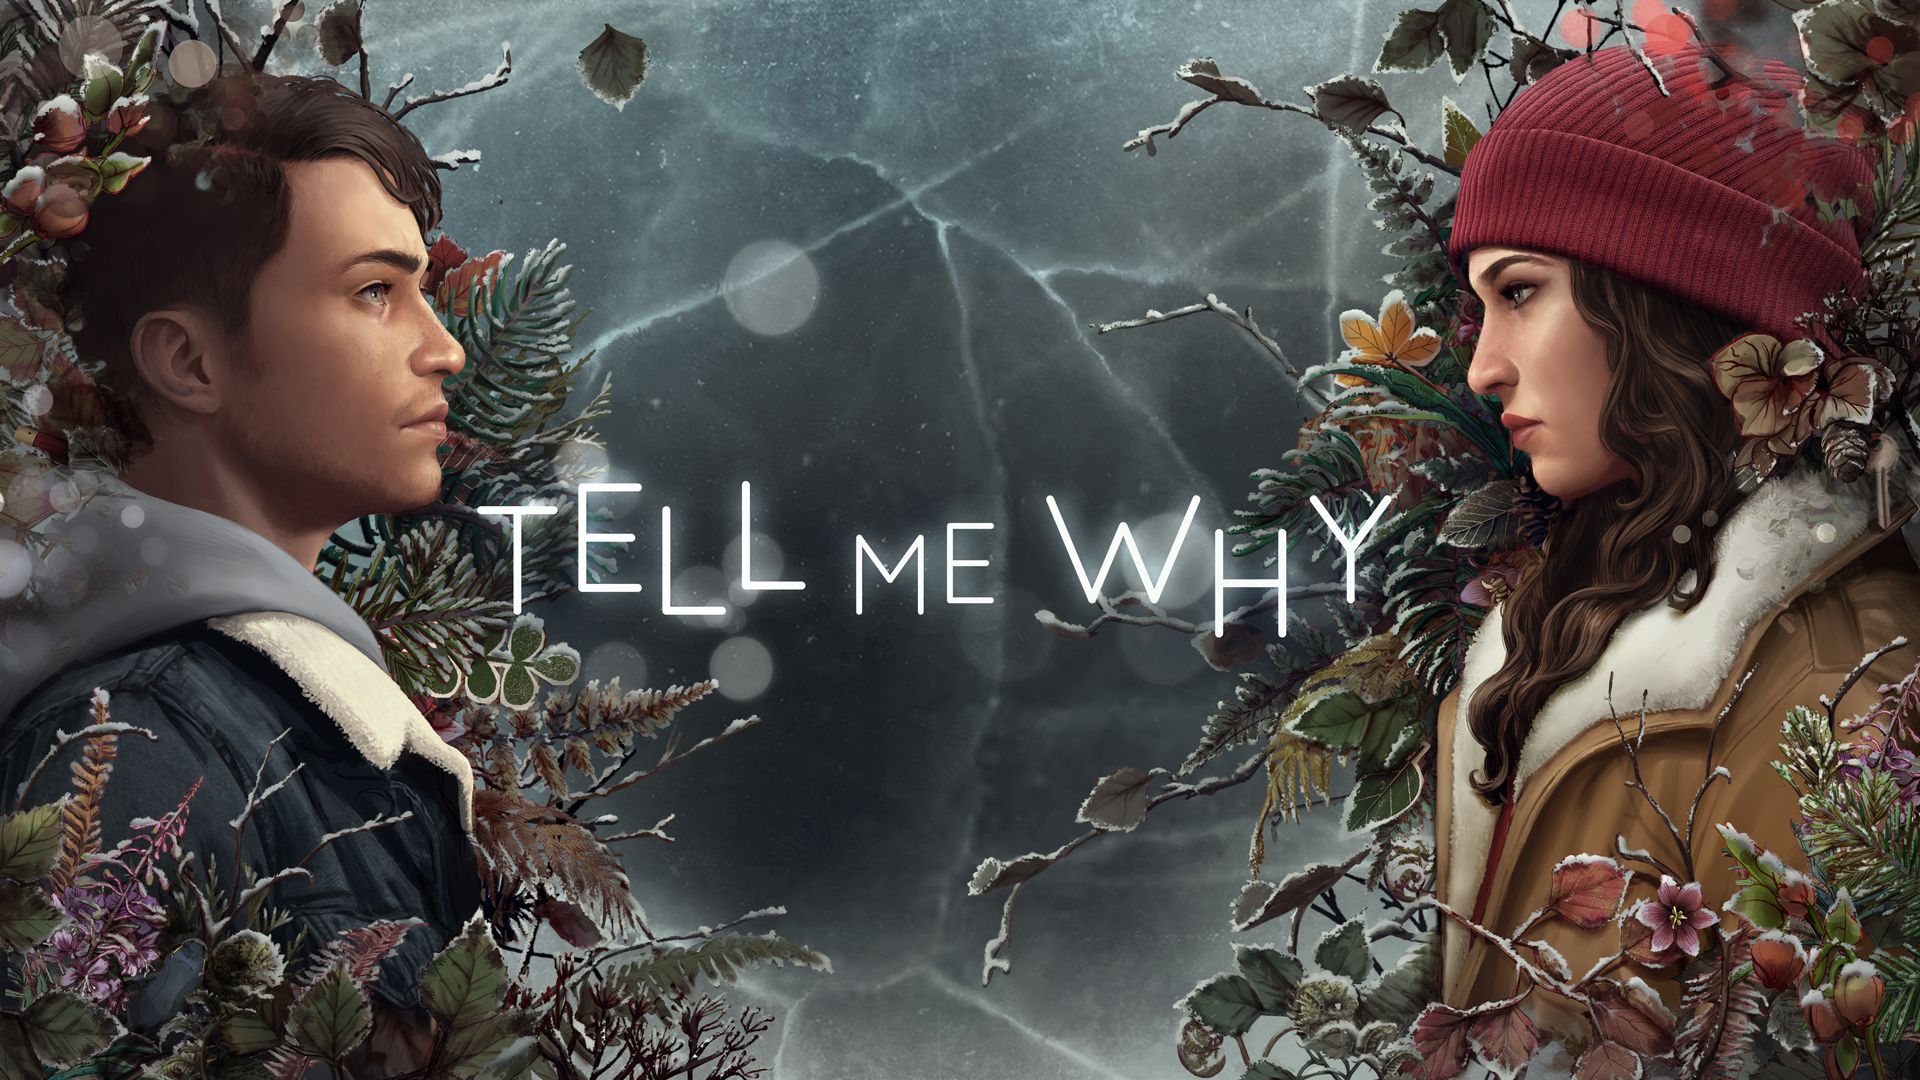 With Tell Me Why, Dontnod will explore how shifting perspectives and false memories can shape a lifetime